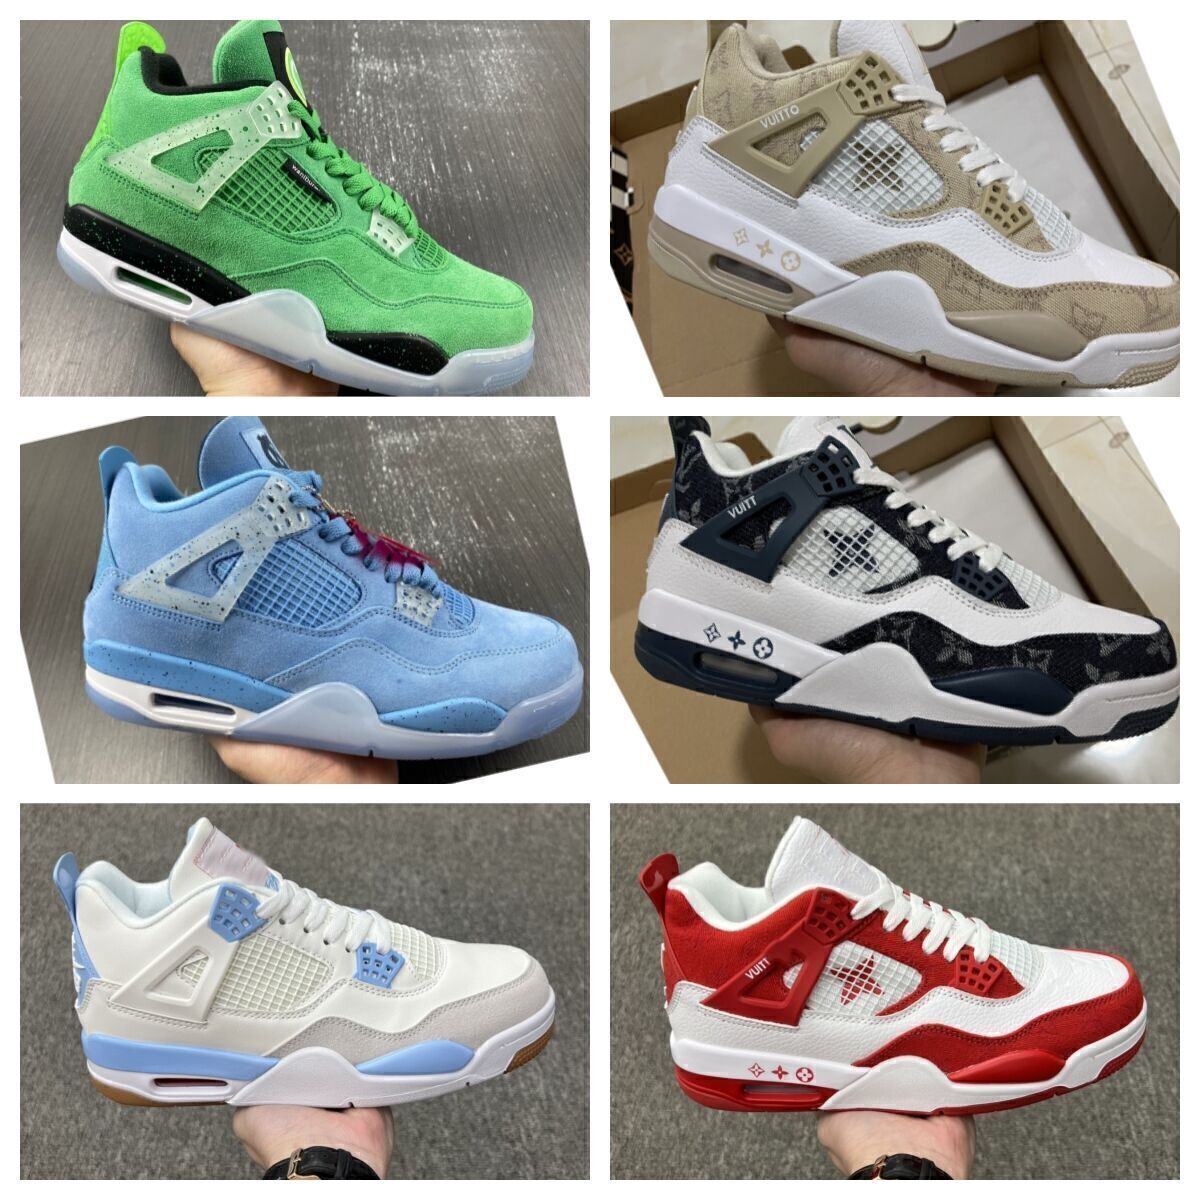 Replicas Shoes Luxury Brands Outdoor Sneaker Yupoo Shoes Sport Shoe  Designer Sneakers - China Louis's Vuitton's Shoes and Brand Shoes price